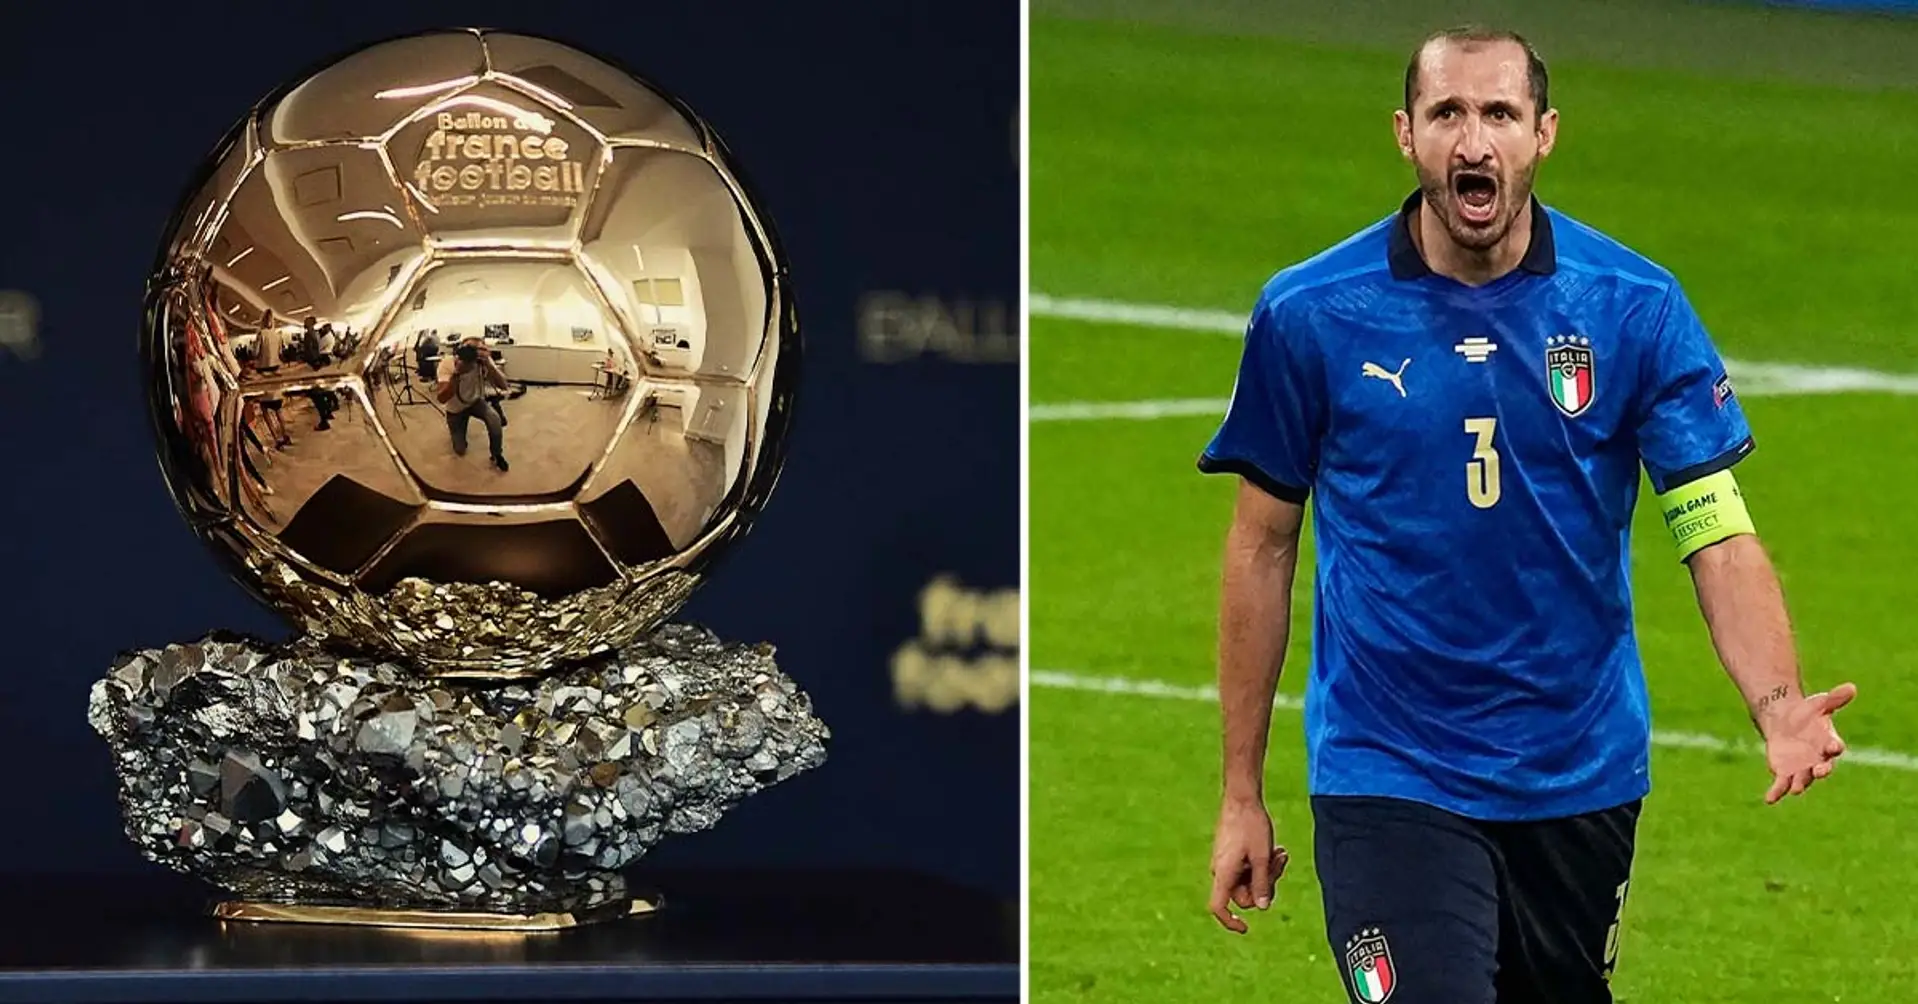 Giorgio Chiellini shares his honest opinion on who should win Ballon d’Or this year